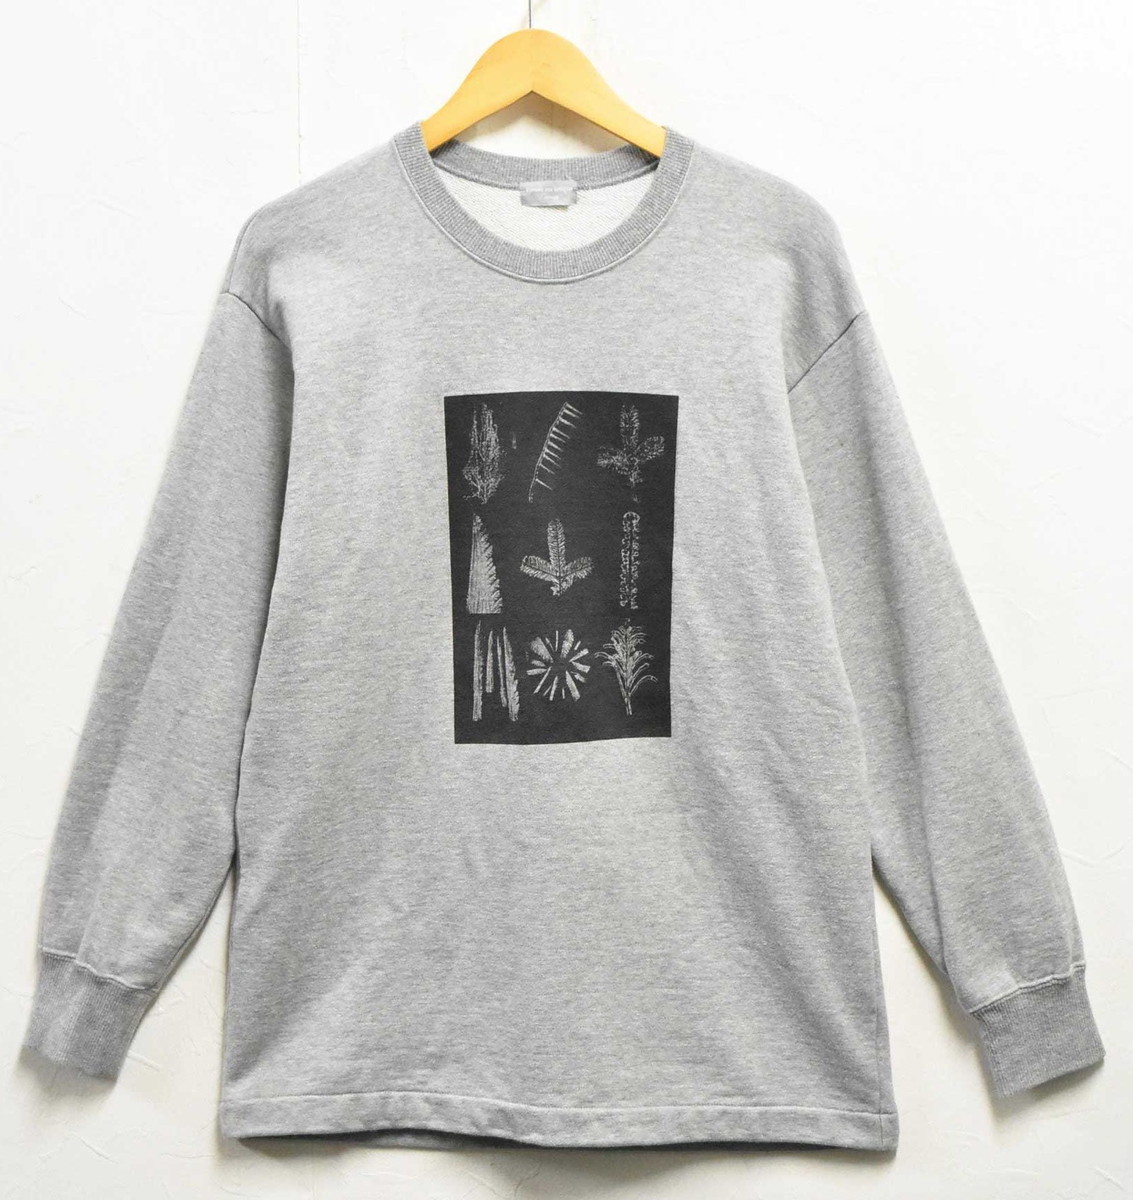  Vintage 1990 period made in Japan com *te* Garcon Homme pull over sweat Heather gray men's M corresponding (32298